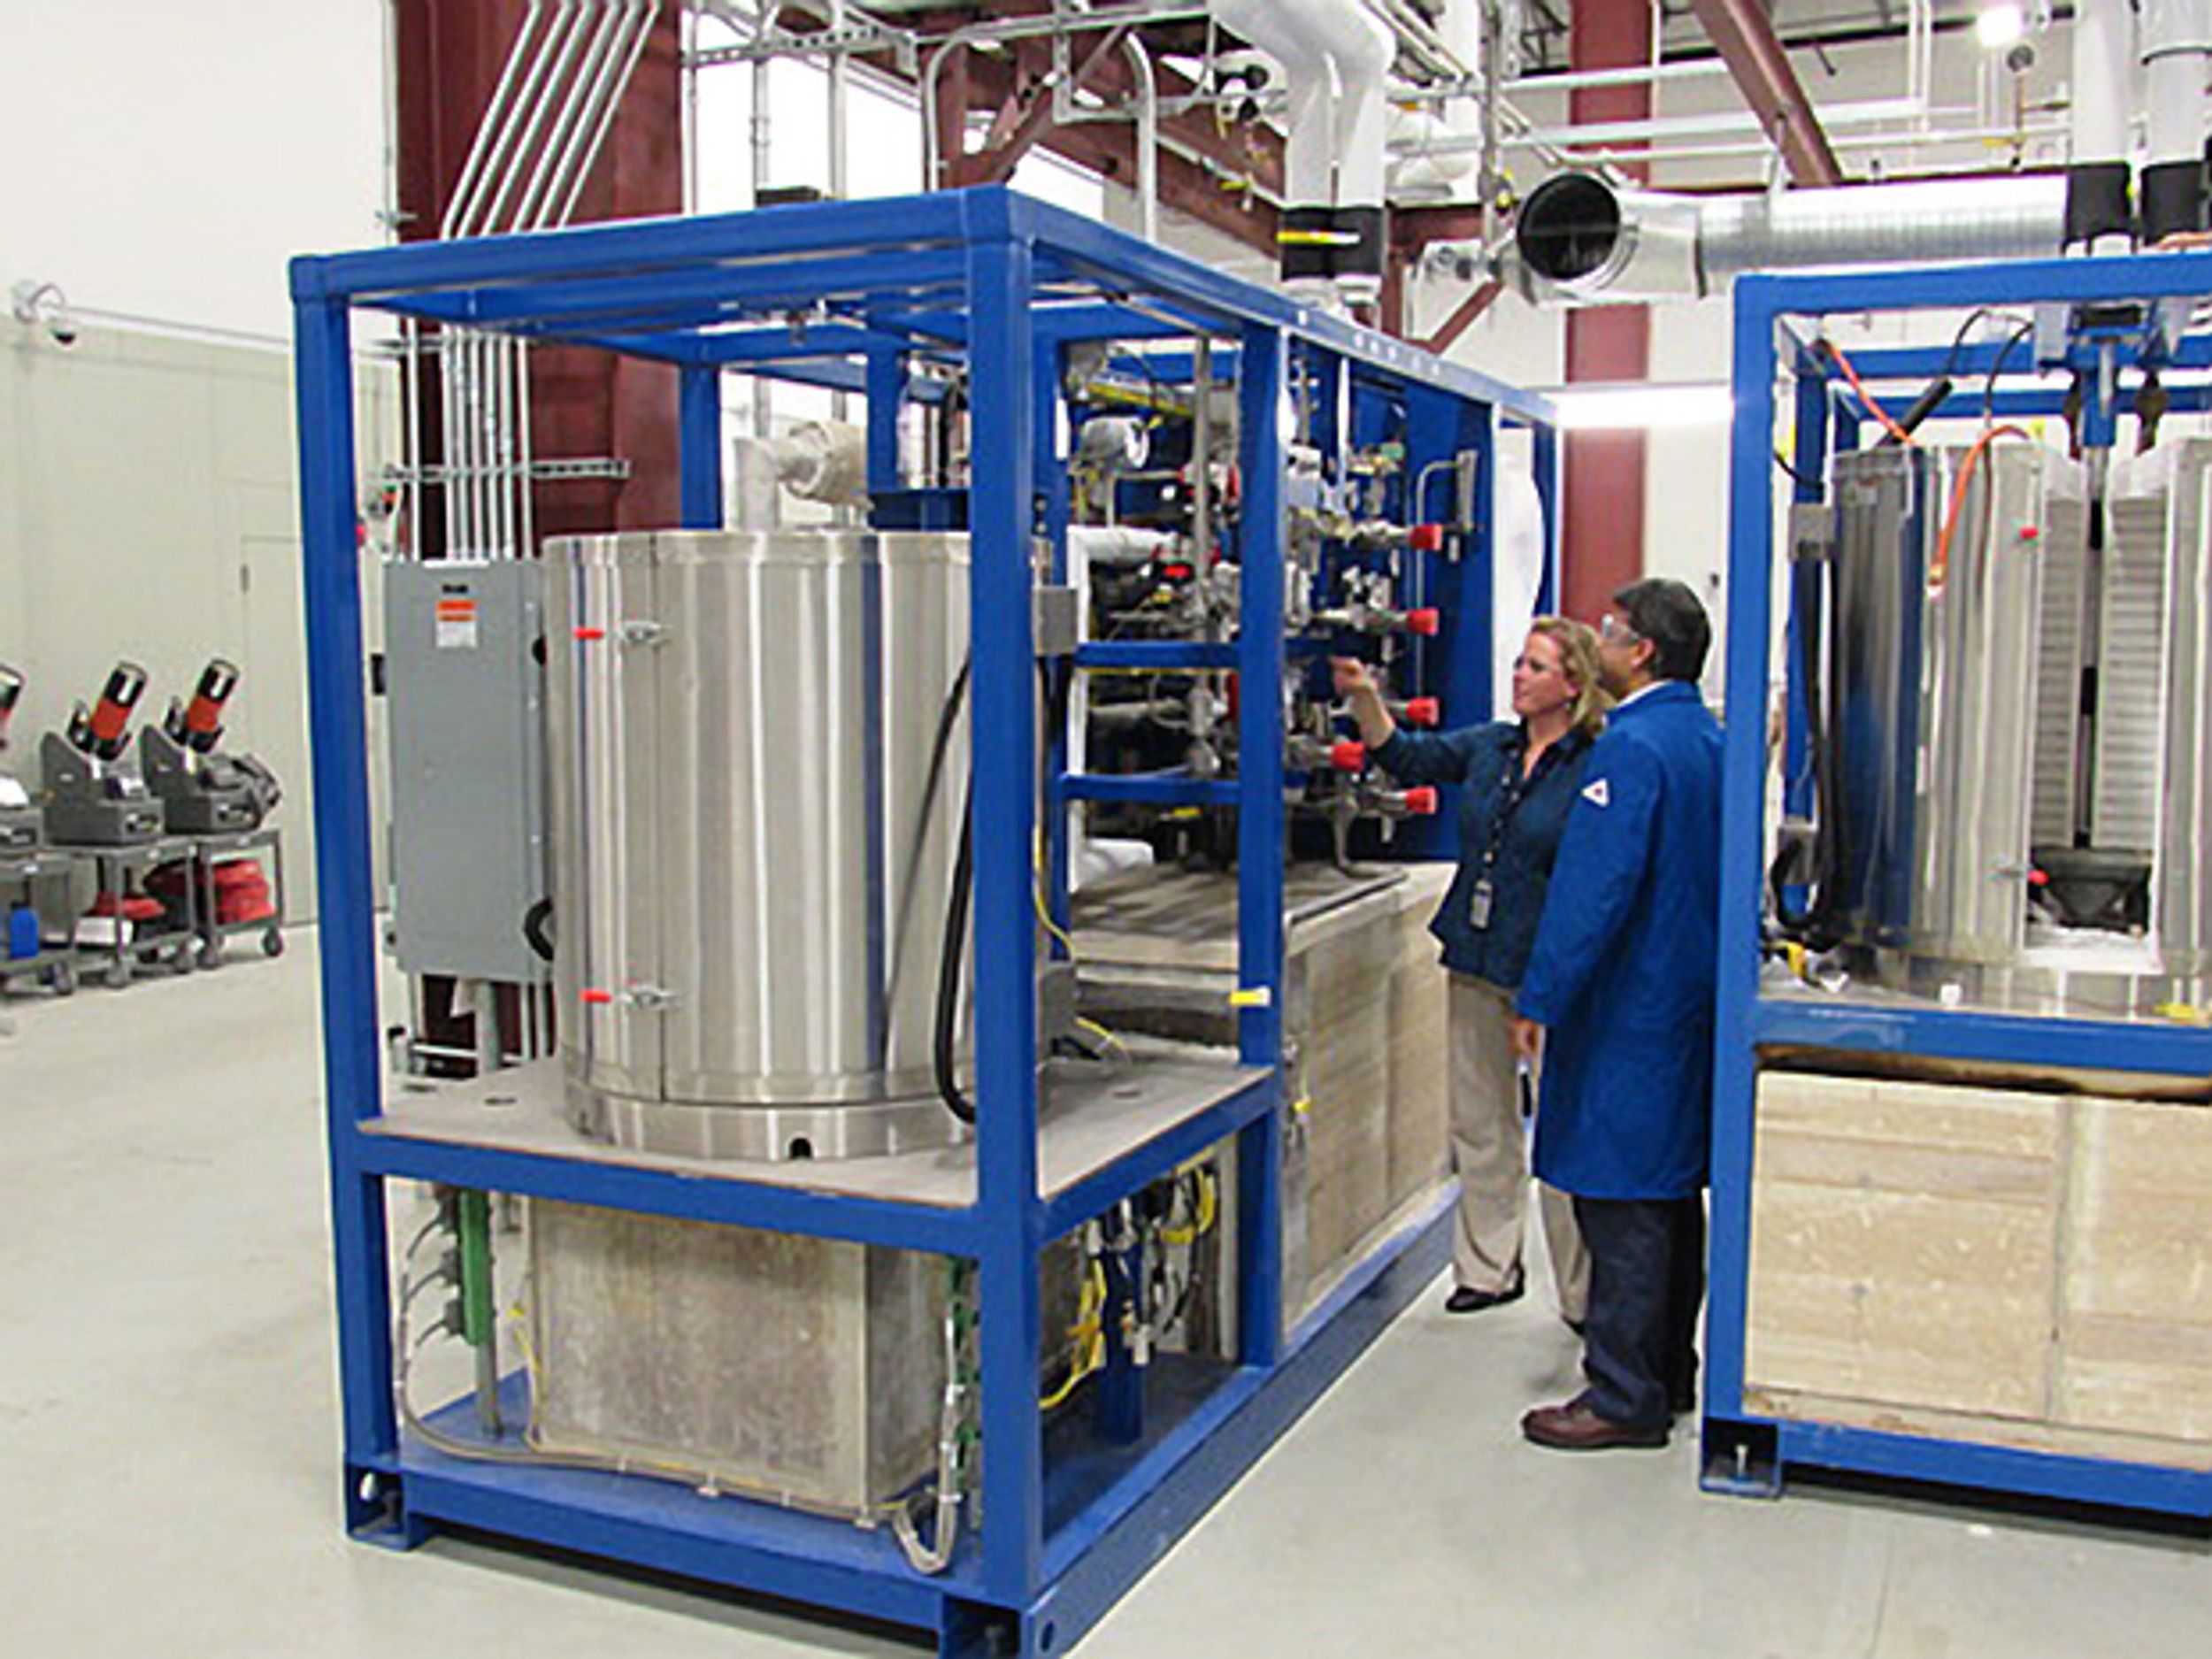 GE Claims Fuel Cell Breakthrough, Starts Pilot Production